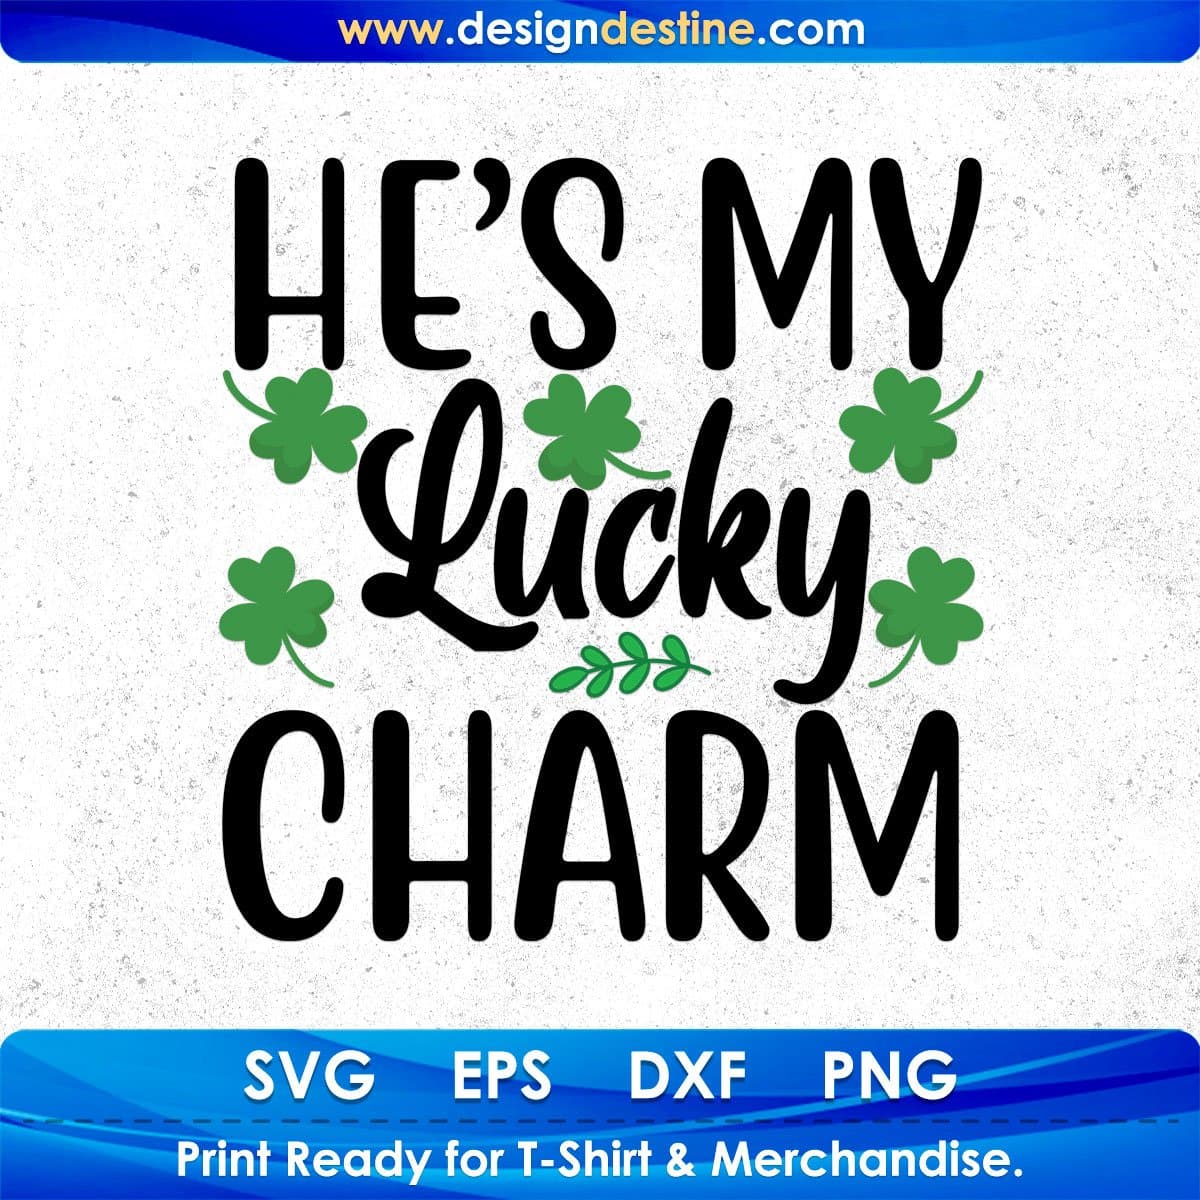 He's My Lucky Charm St Patrick's Day T shirt Design In Svg Png